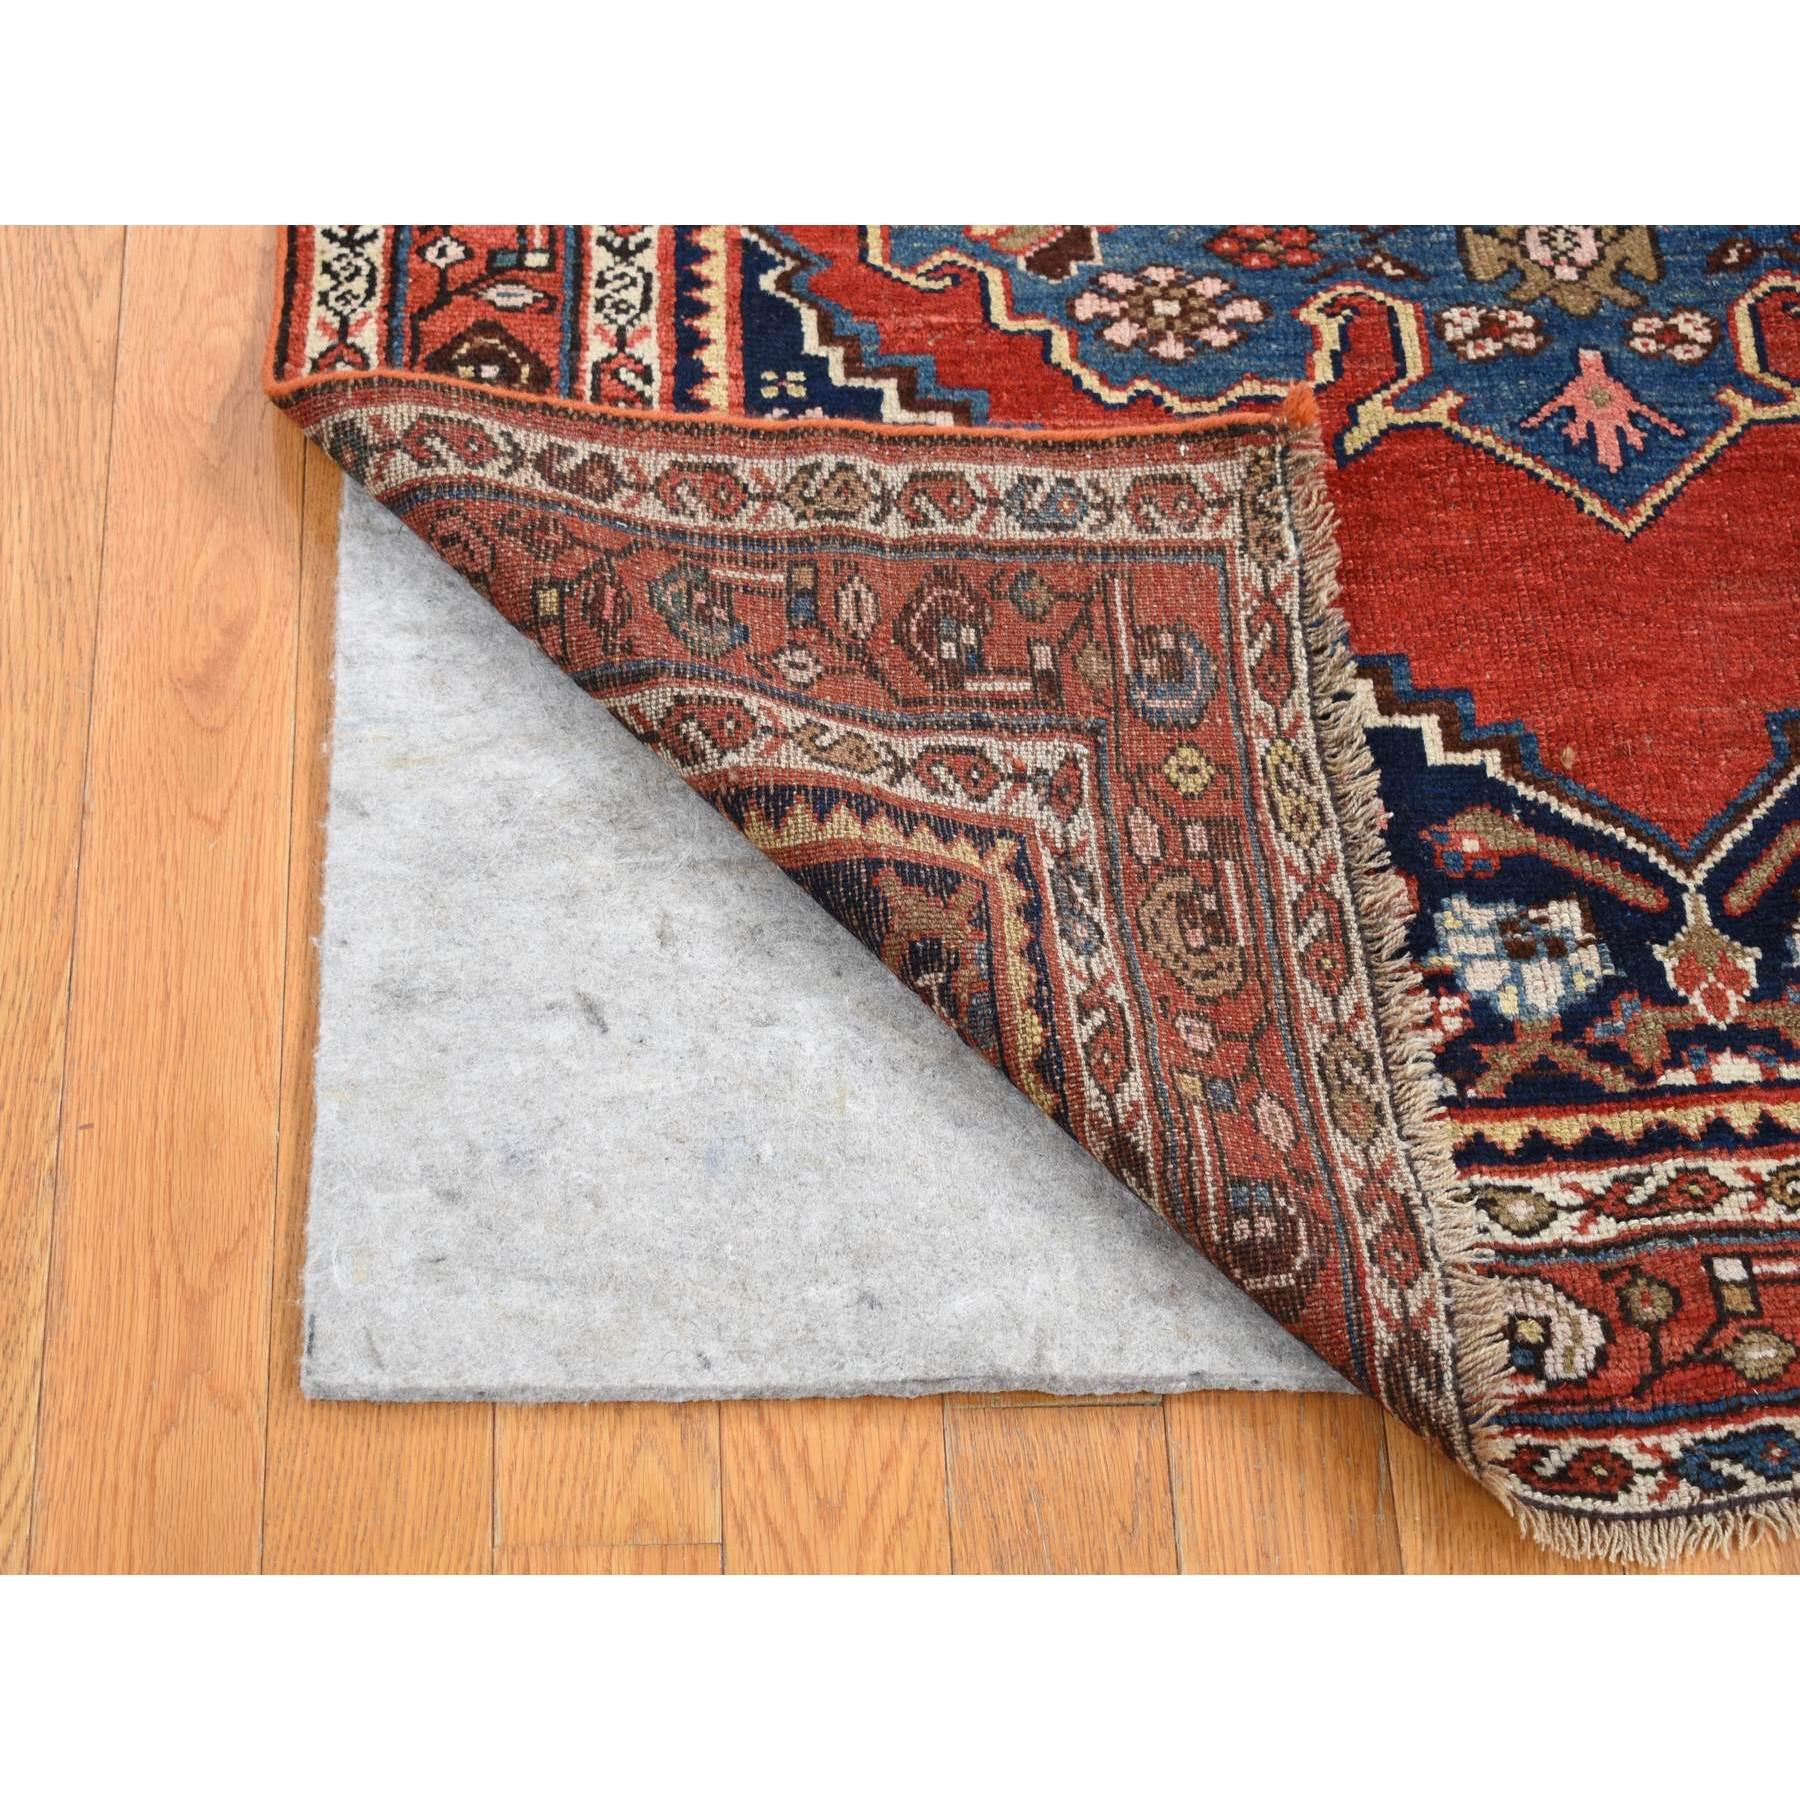 This fabulous hand-knotted carpet has been created and designed for extra strength and durability. This rug has been handcrafted for weeks in the traditional method that is used to make exact rug size in feet and inches : 4'0